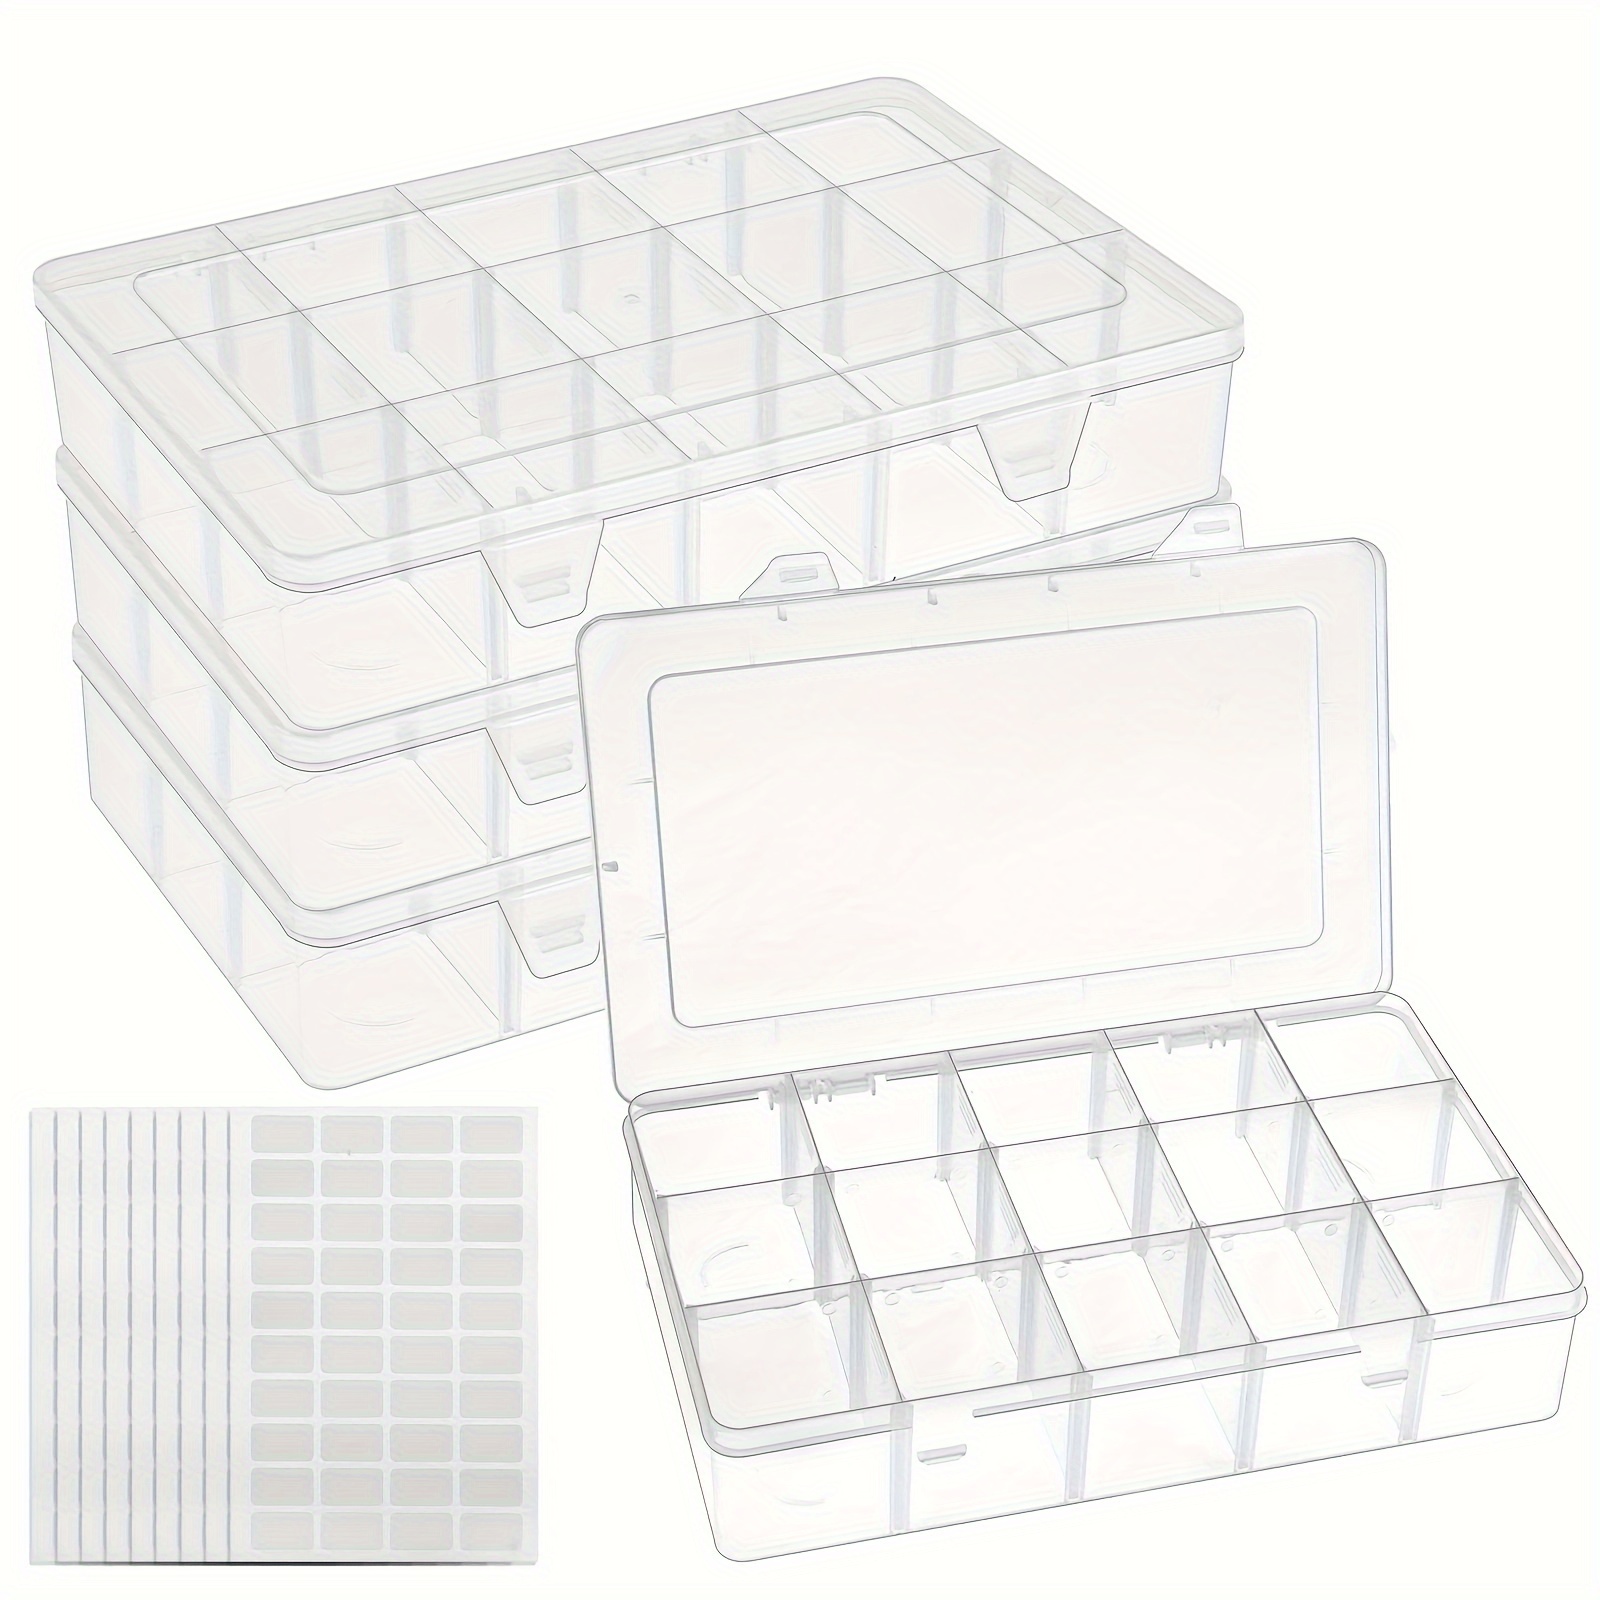 

4 Pcs 15 Grids Storage Container Plastic Washi Tape Organizer, 15 Compartments Clear Craft Box With Adjustable Divider Removable For Sewing, Tackle, Thread, Art Diy, Beads, 10.8x6.5x2.2in